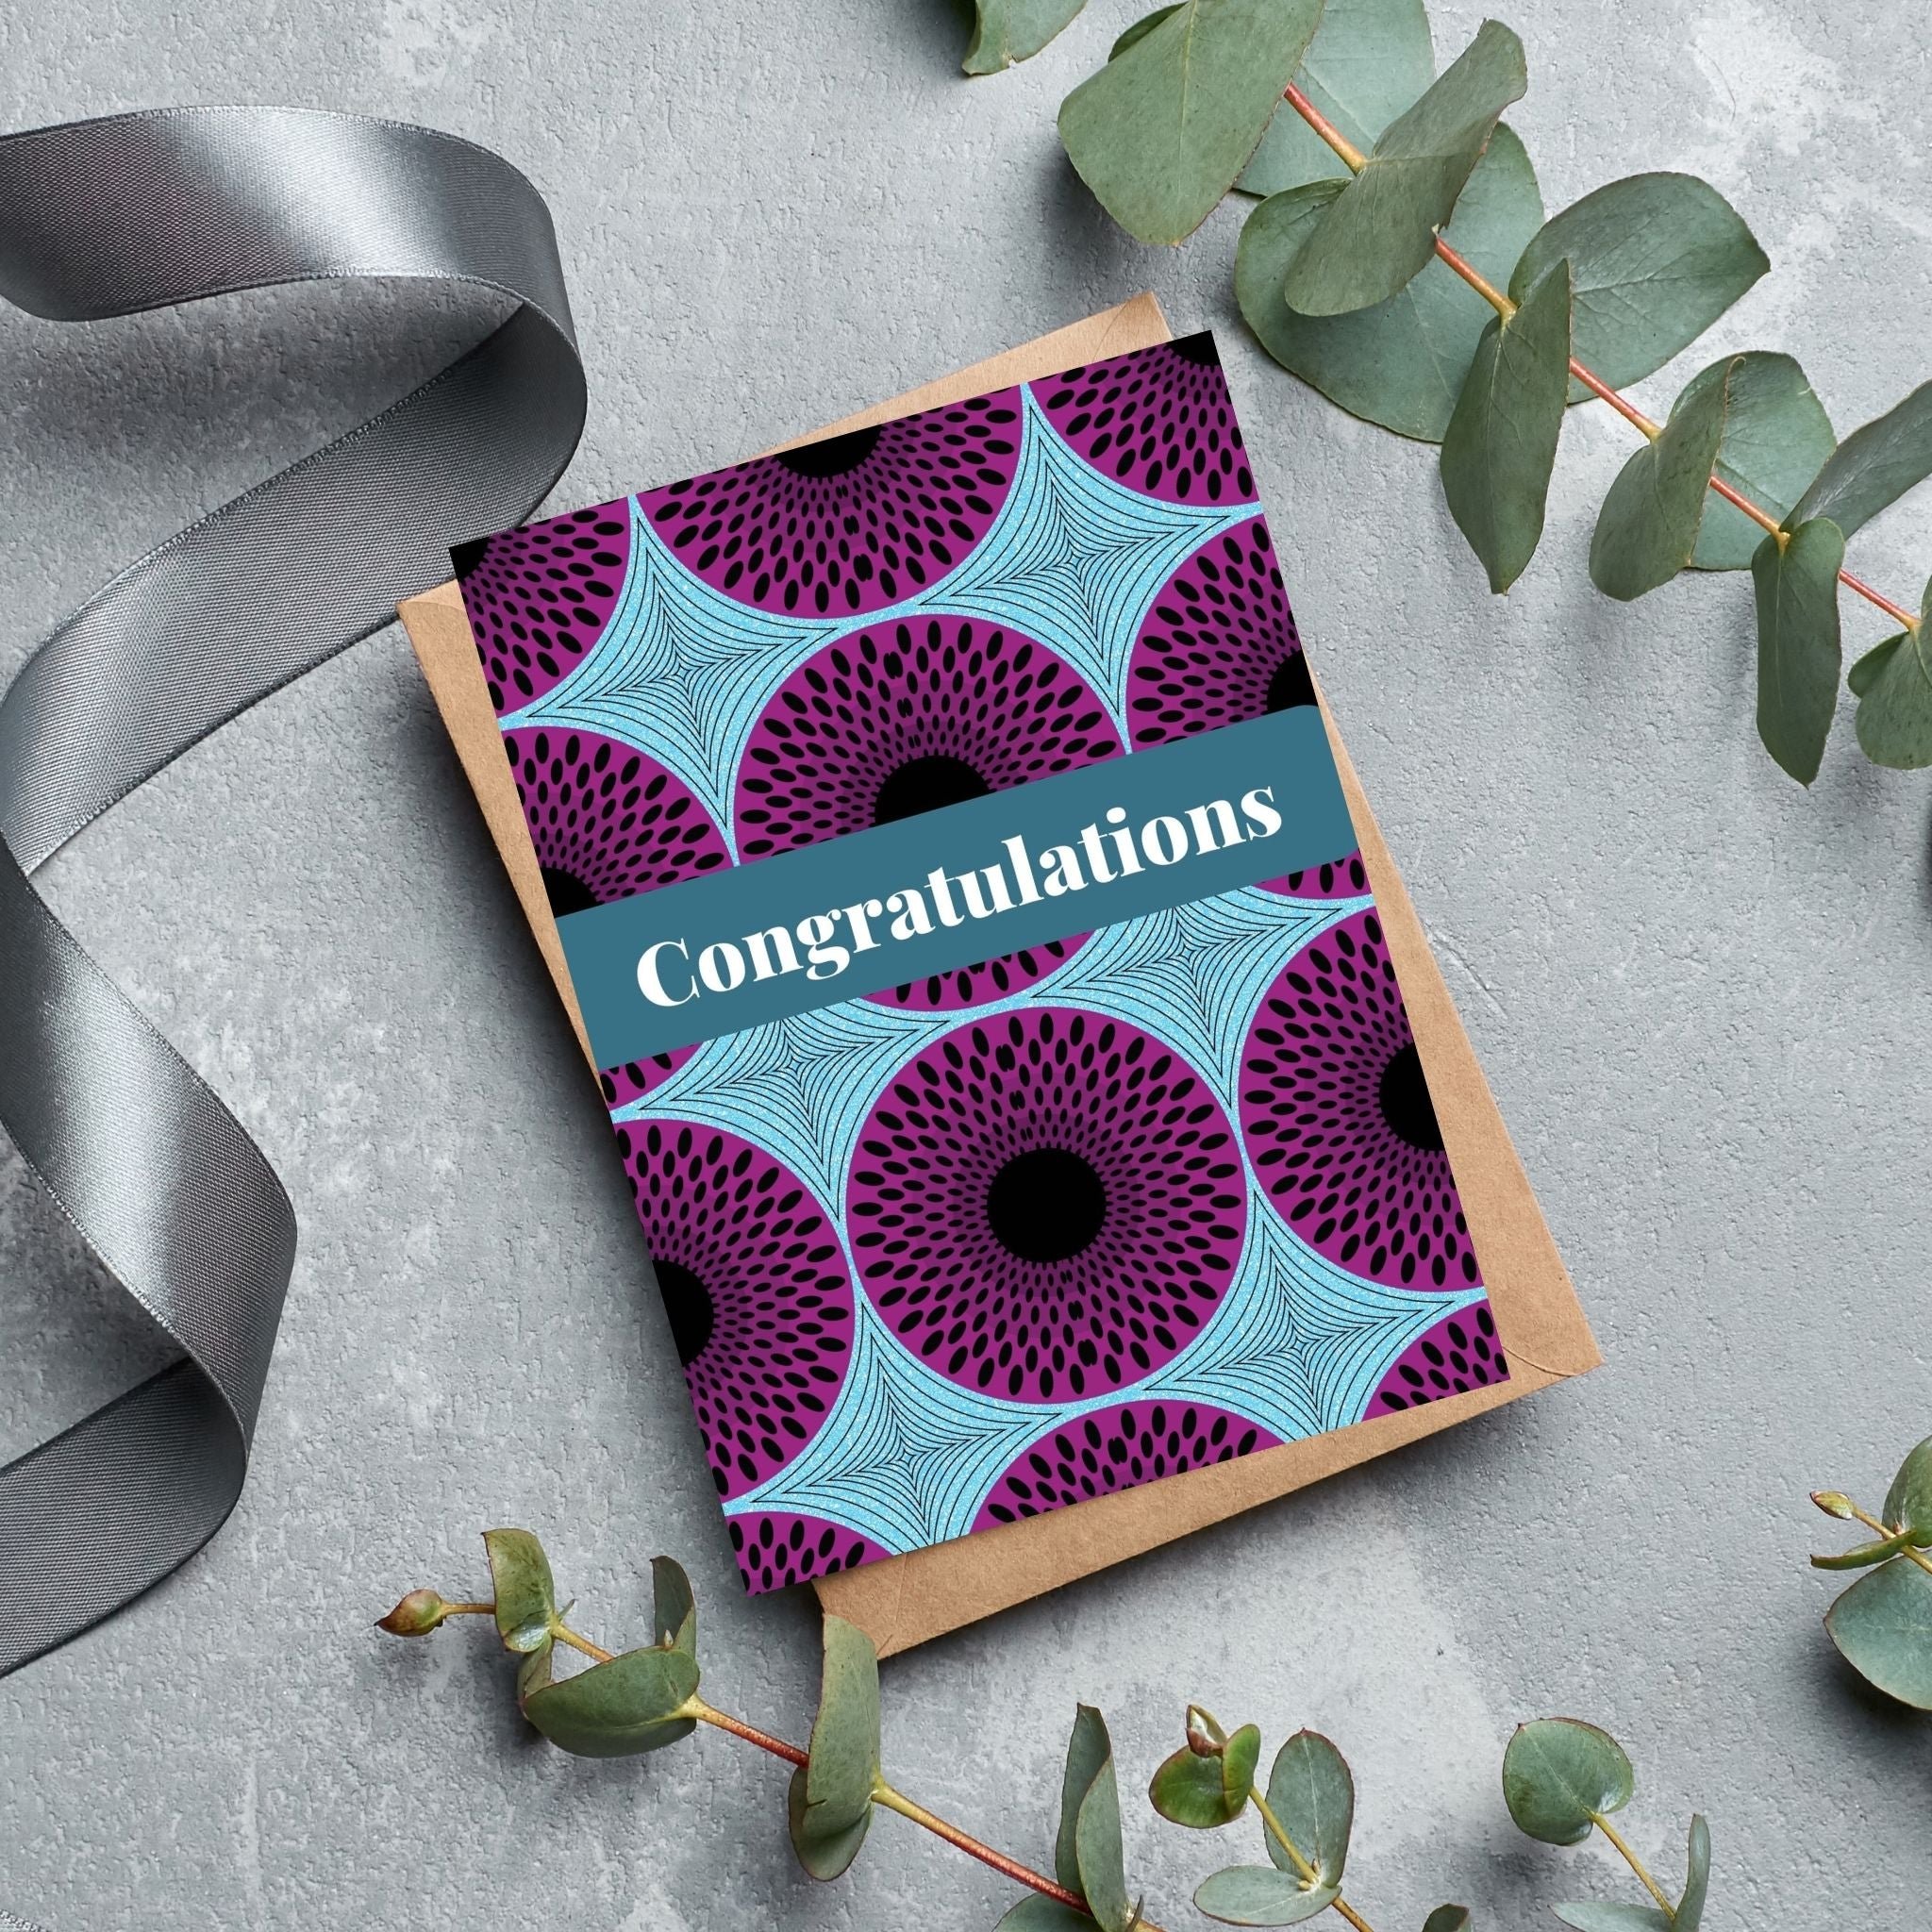 Congratulations African Inspired Print Card